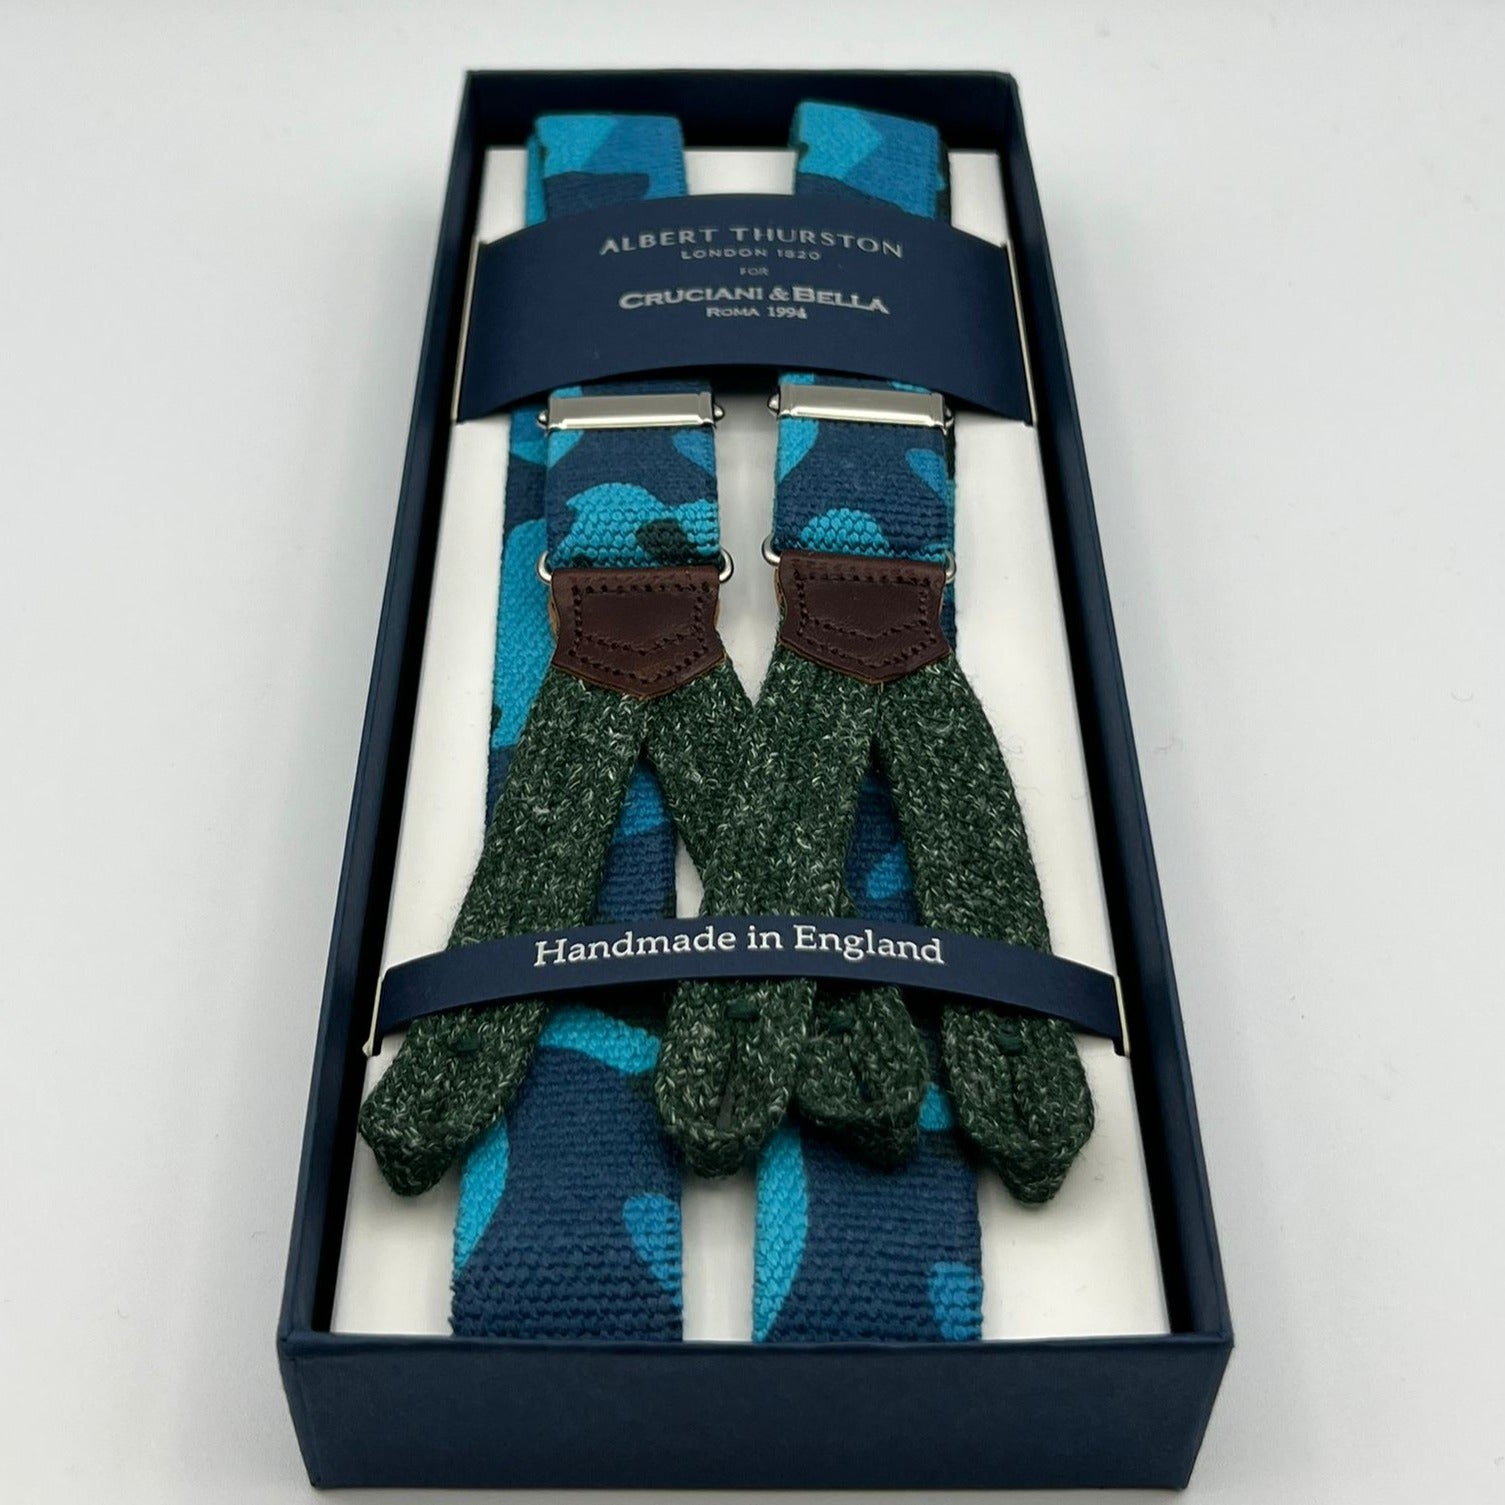 Albert Thurston for Cruciani & Bella Made in England Adjustable Sizing 25 mm elastic braces Blue, Azure  Military Motif Braid ends Y-Shaped Nickel  Fittings Size: L #7480